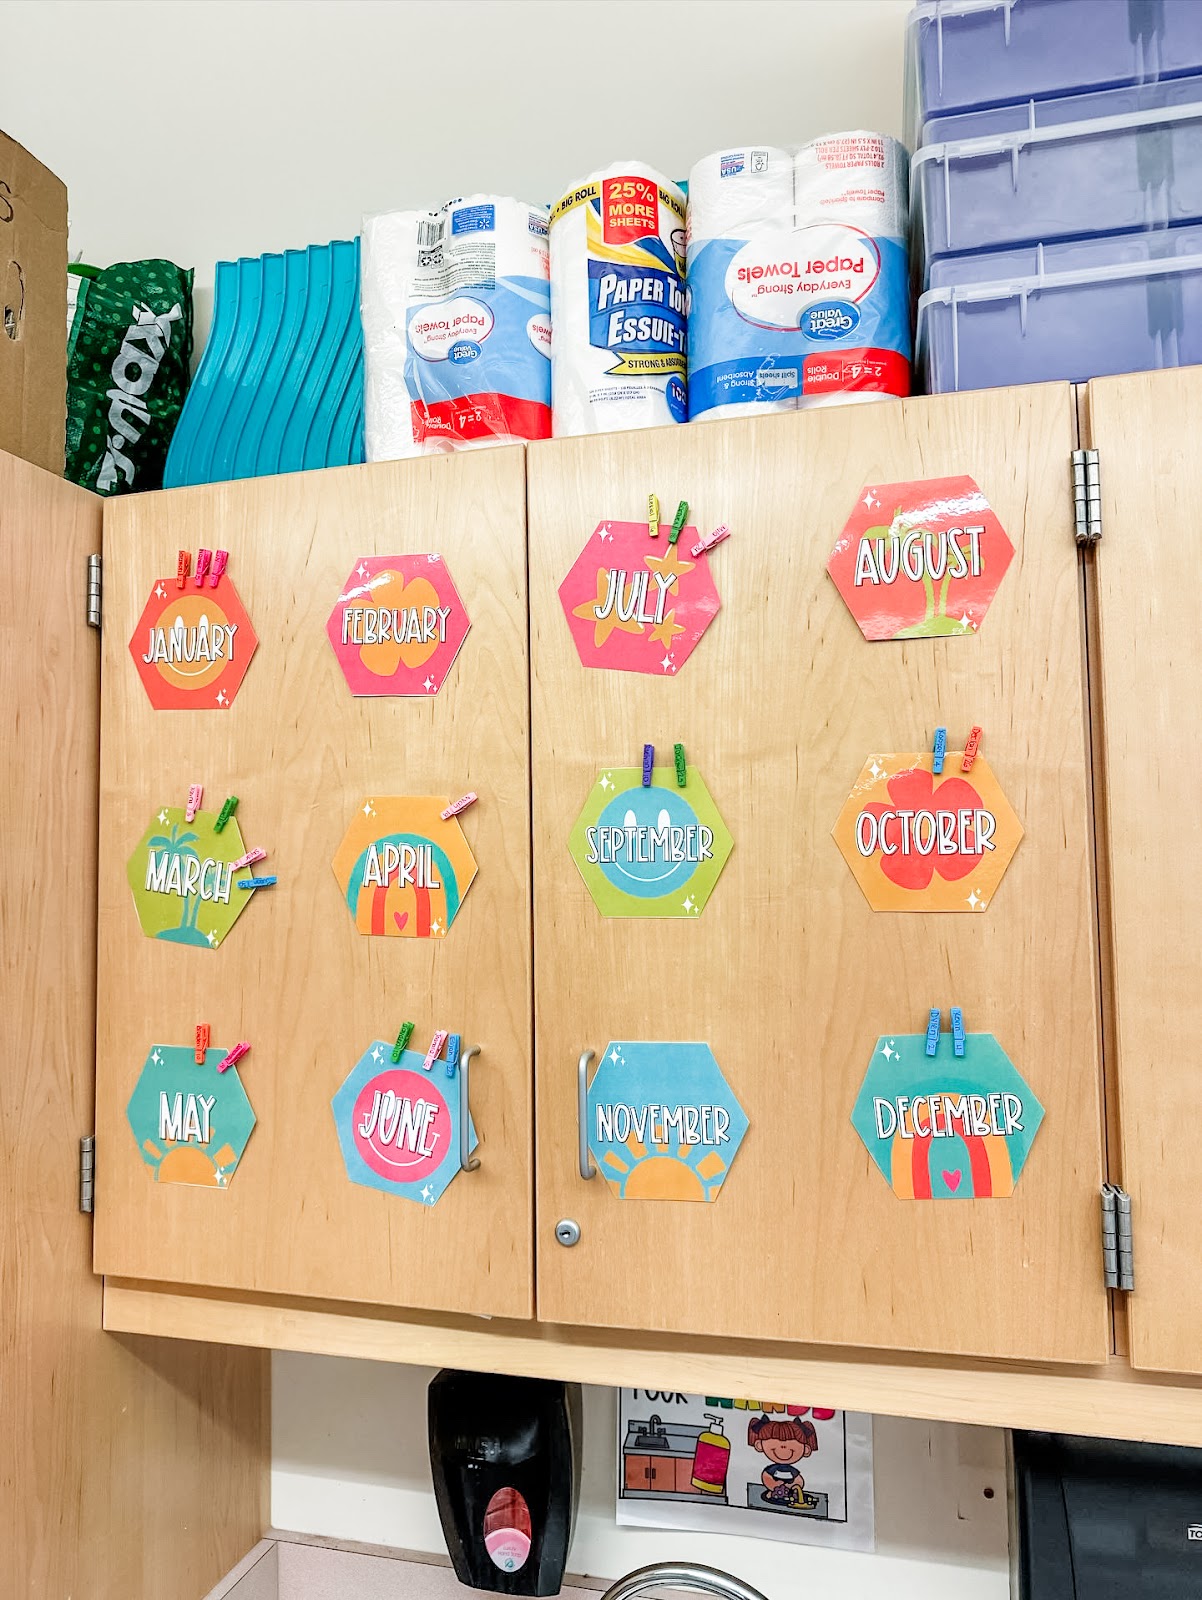 This image shows cabinet doors with a birthday display. There are twelve hexagons for each month of the year with clothespins around them. The clothespins represent students who have birthdays during that month. 